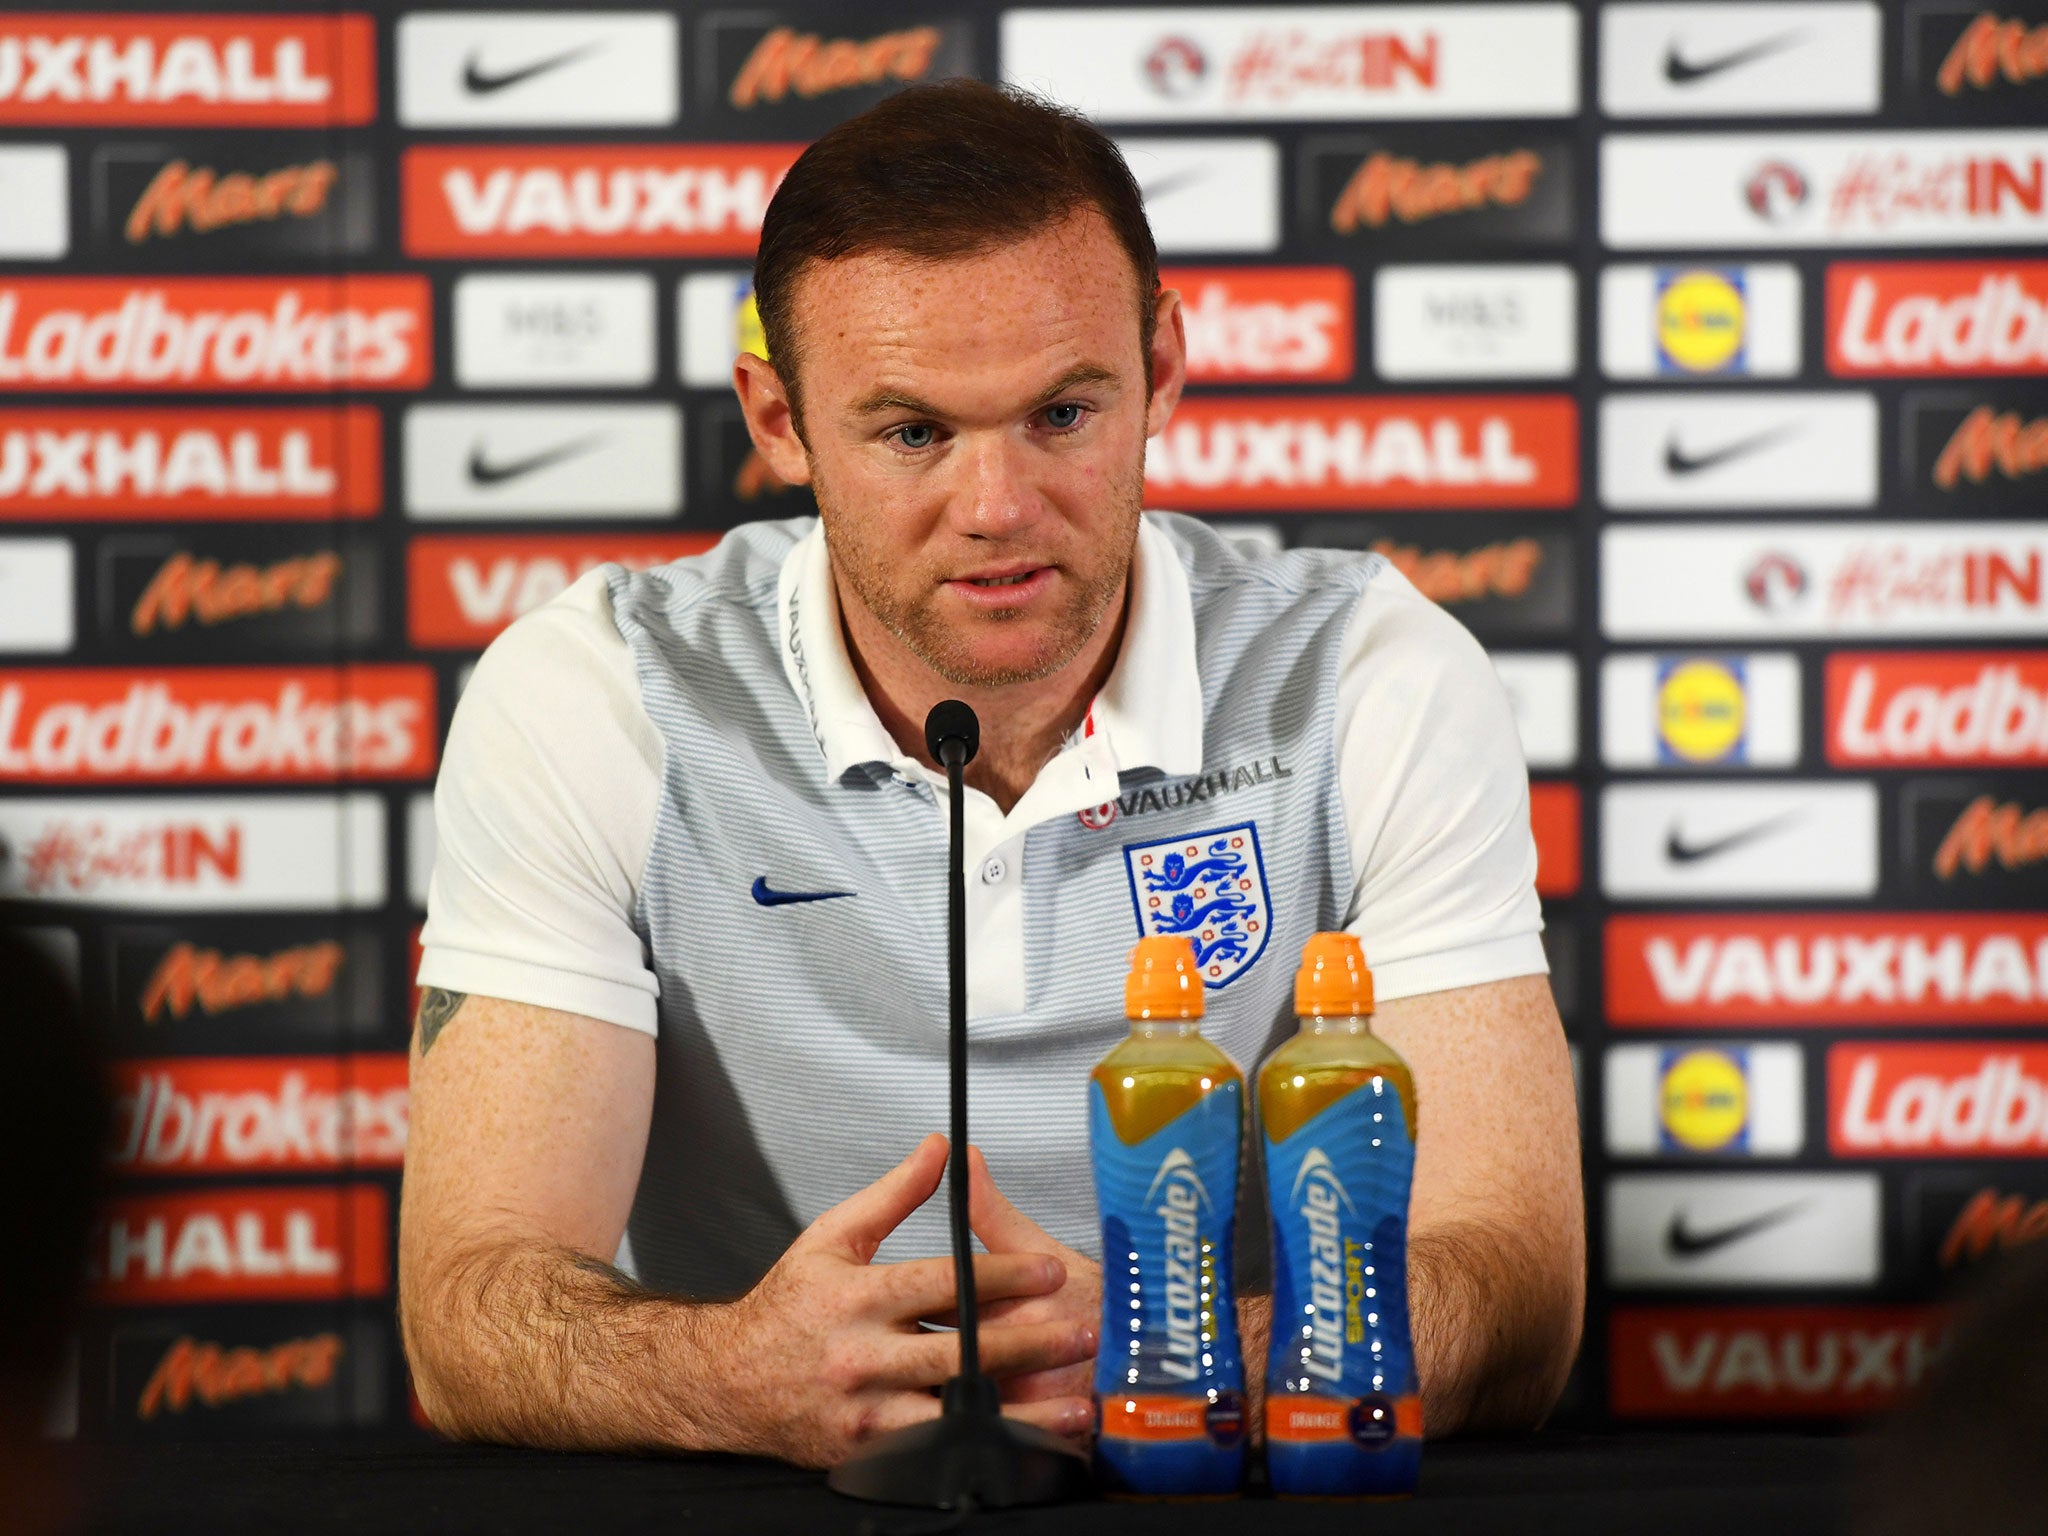 Wayne Rooney was remarkably candid during his press conference on Tuesday